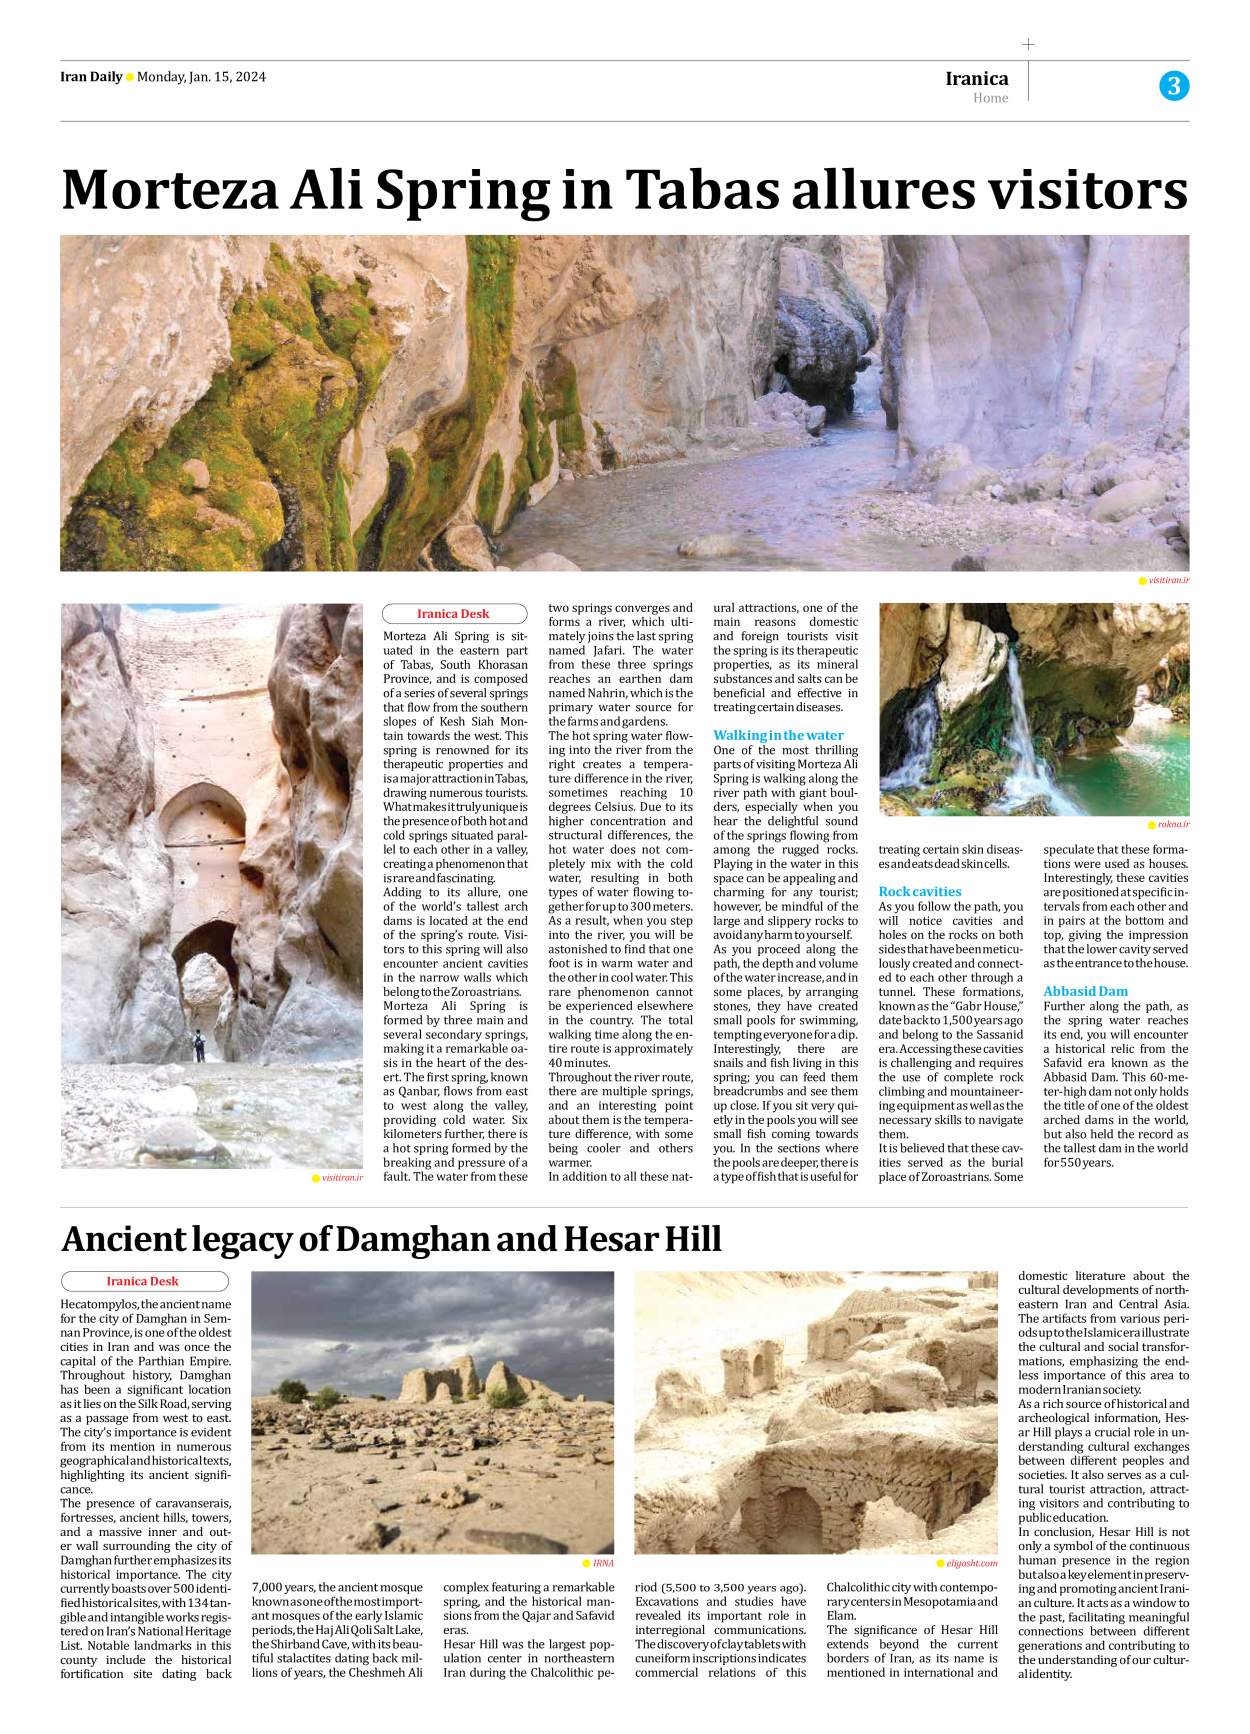 Iran Daily - Number Seven Thousand Four Hundred and Eighty Five - 15 January 2024 - Page 3